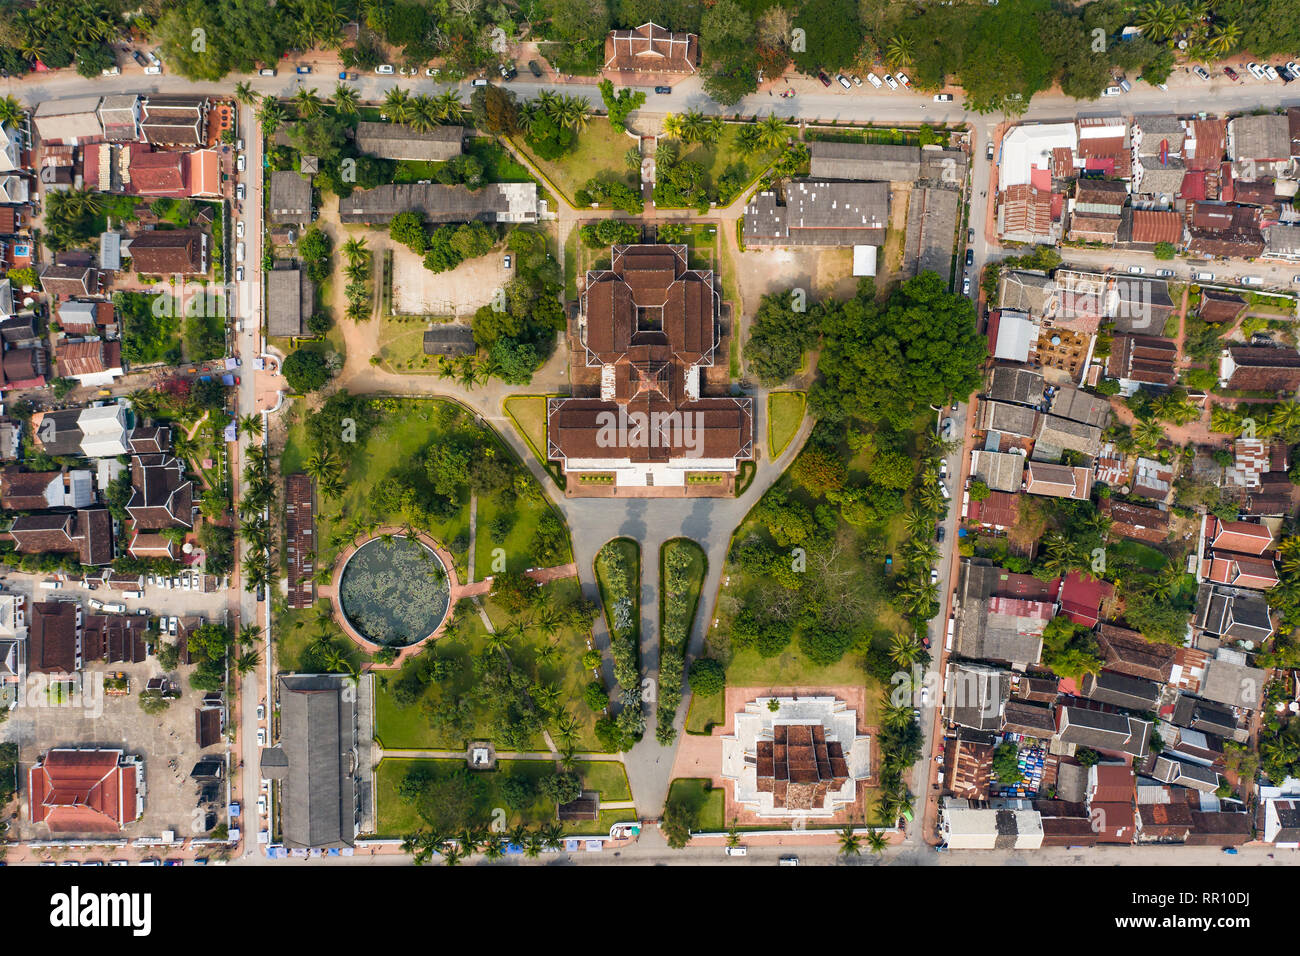 (view from above) Stunning aerial view of the beautiful Haw Pha Bang Temple and the Royal Palace National Museum in Luang Prabang, Laos. Stock Photo